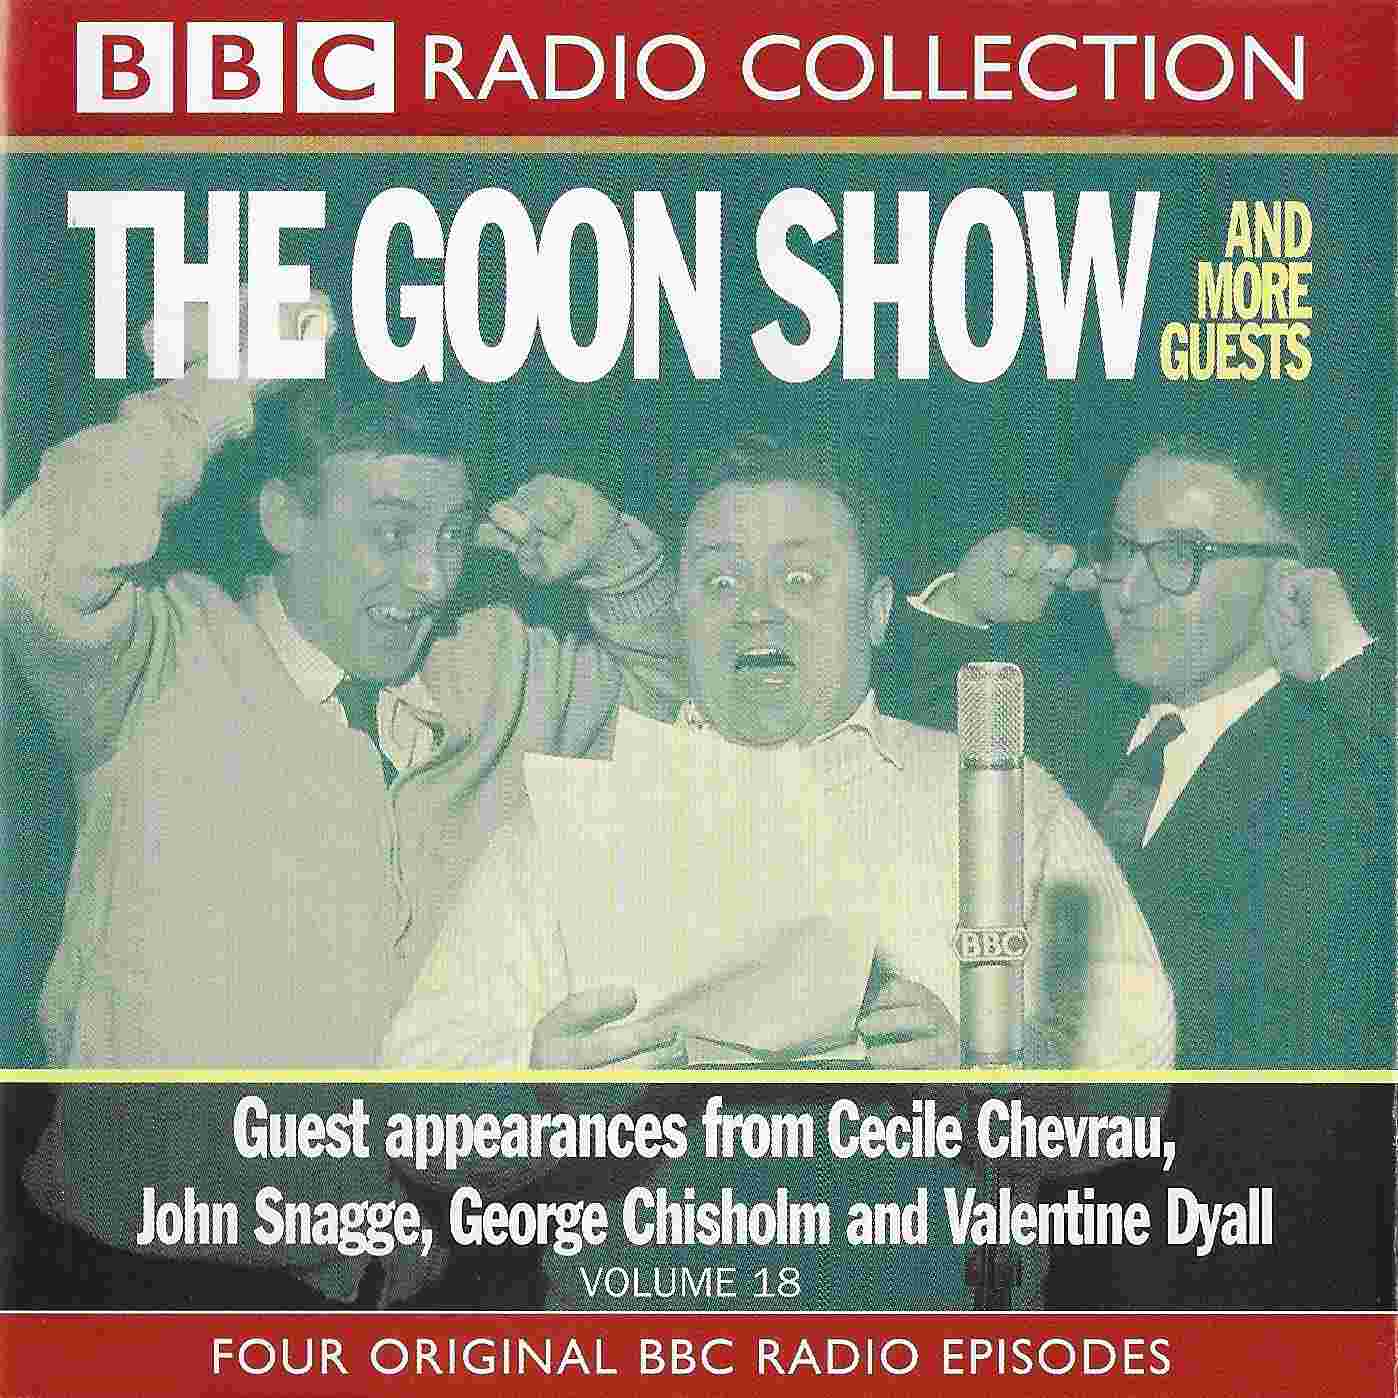 Picture of ISBN 0-563-55342-1 The Goon show 18 and more guests by artist Spike Milligan / Larry Stephens from the BBC cds - Records and Tapes library